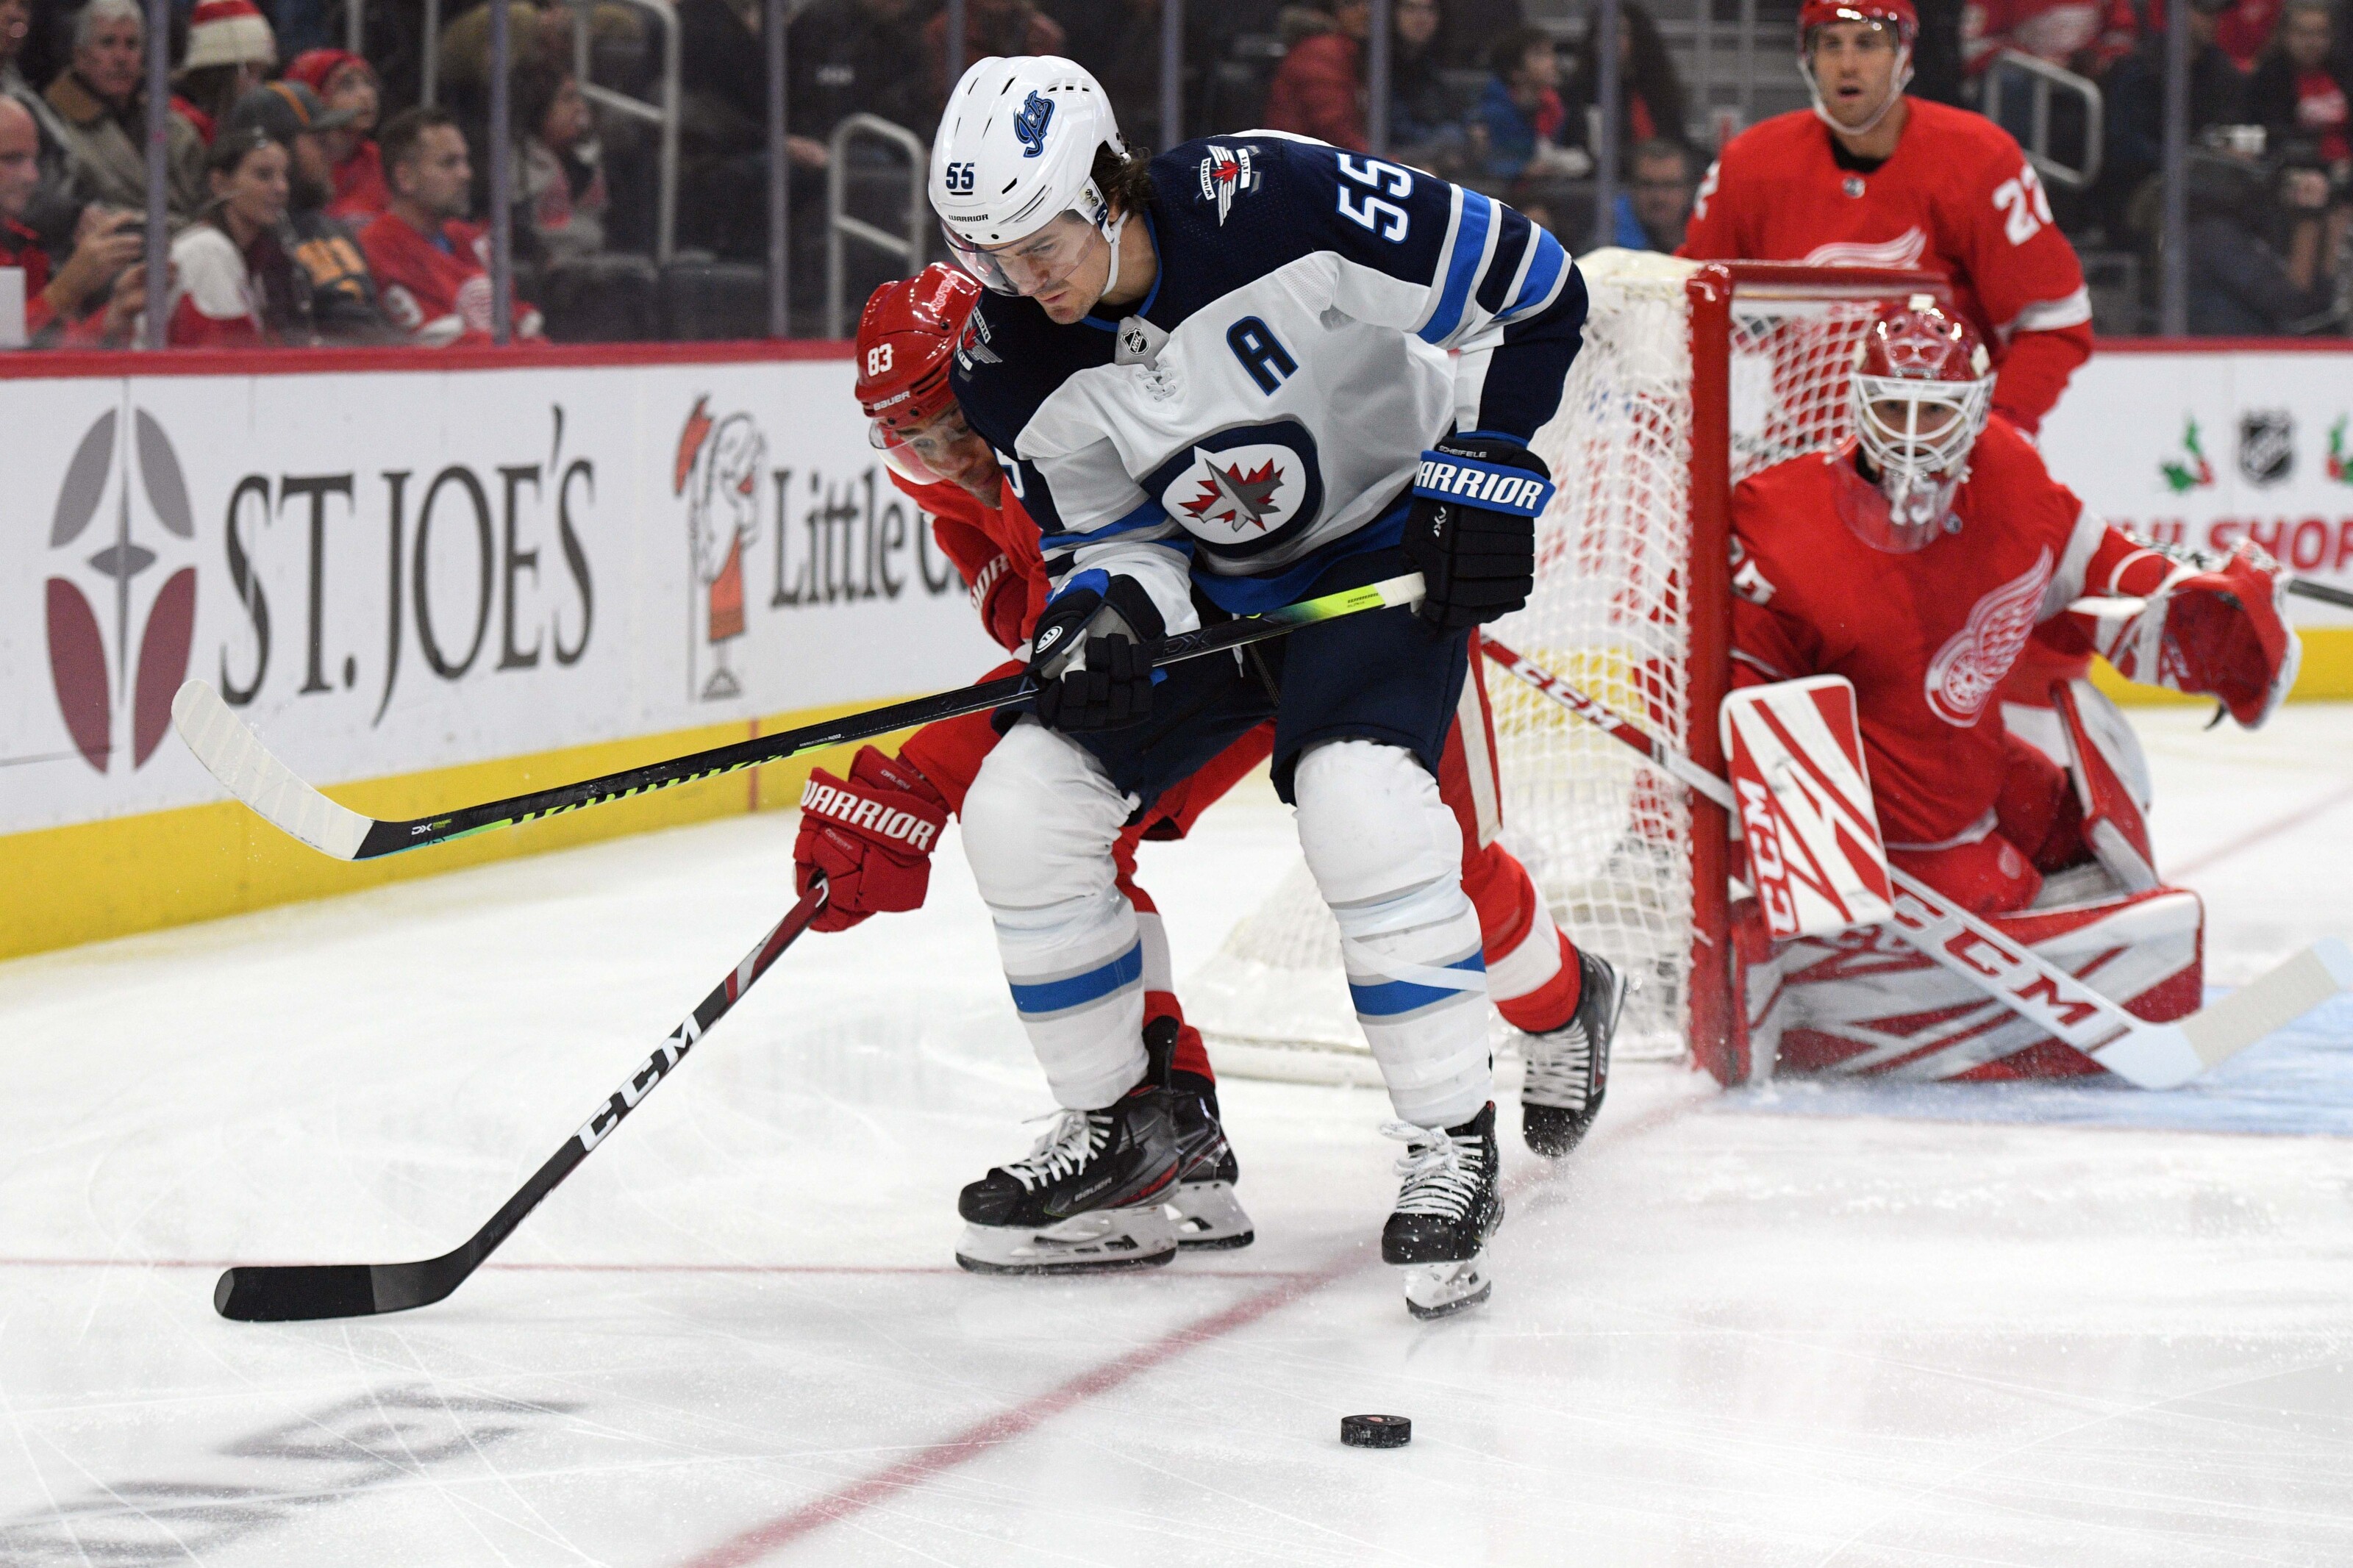 Winnipeg Jets vs Detroit Red Wings Preview: The Road Trip Continues